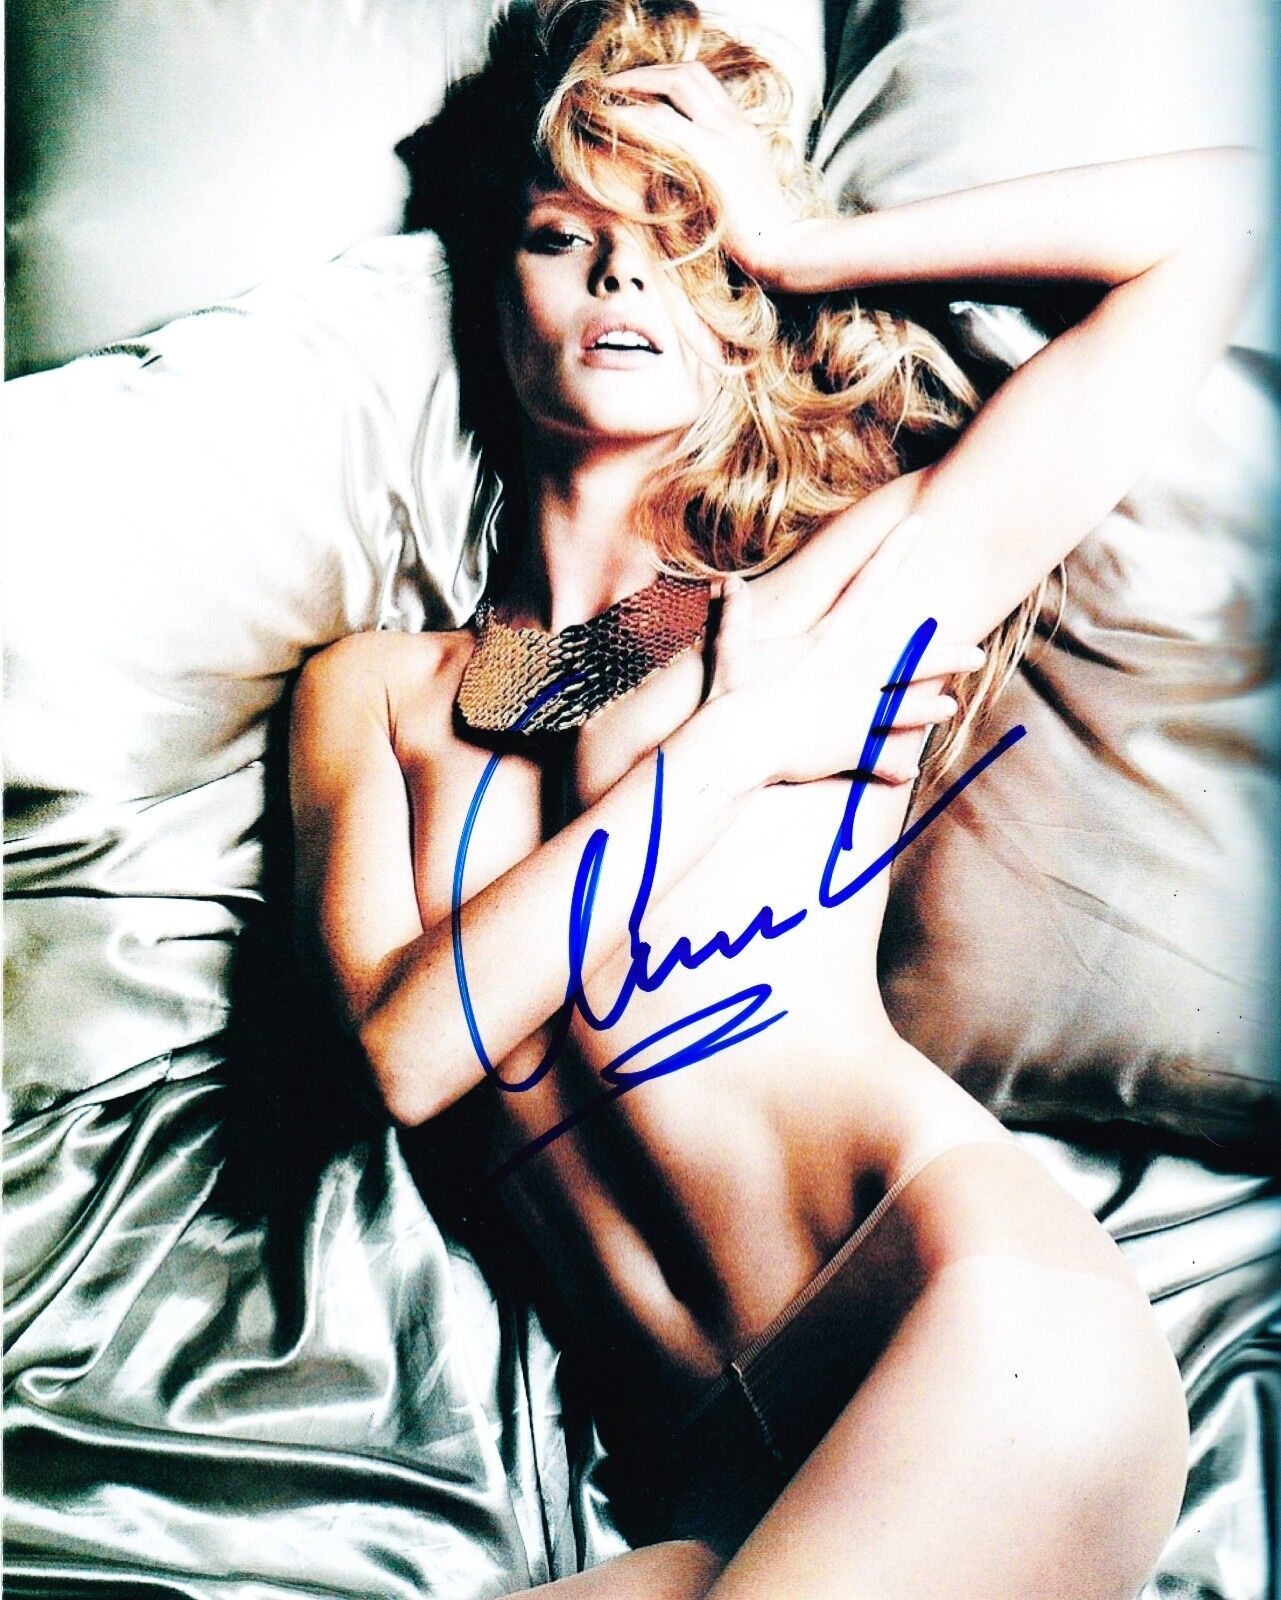 ANNE VYALITSYNA ANNEV SIGNED 8X10 PHOTO AUTHENTIC AUTOGRAPH SPORTS ILLUSTRATED A